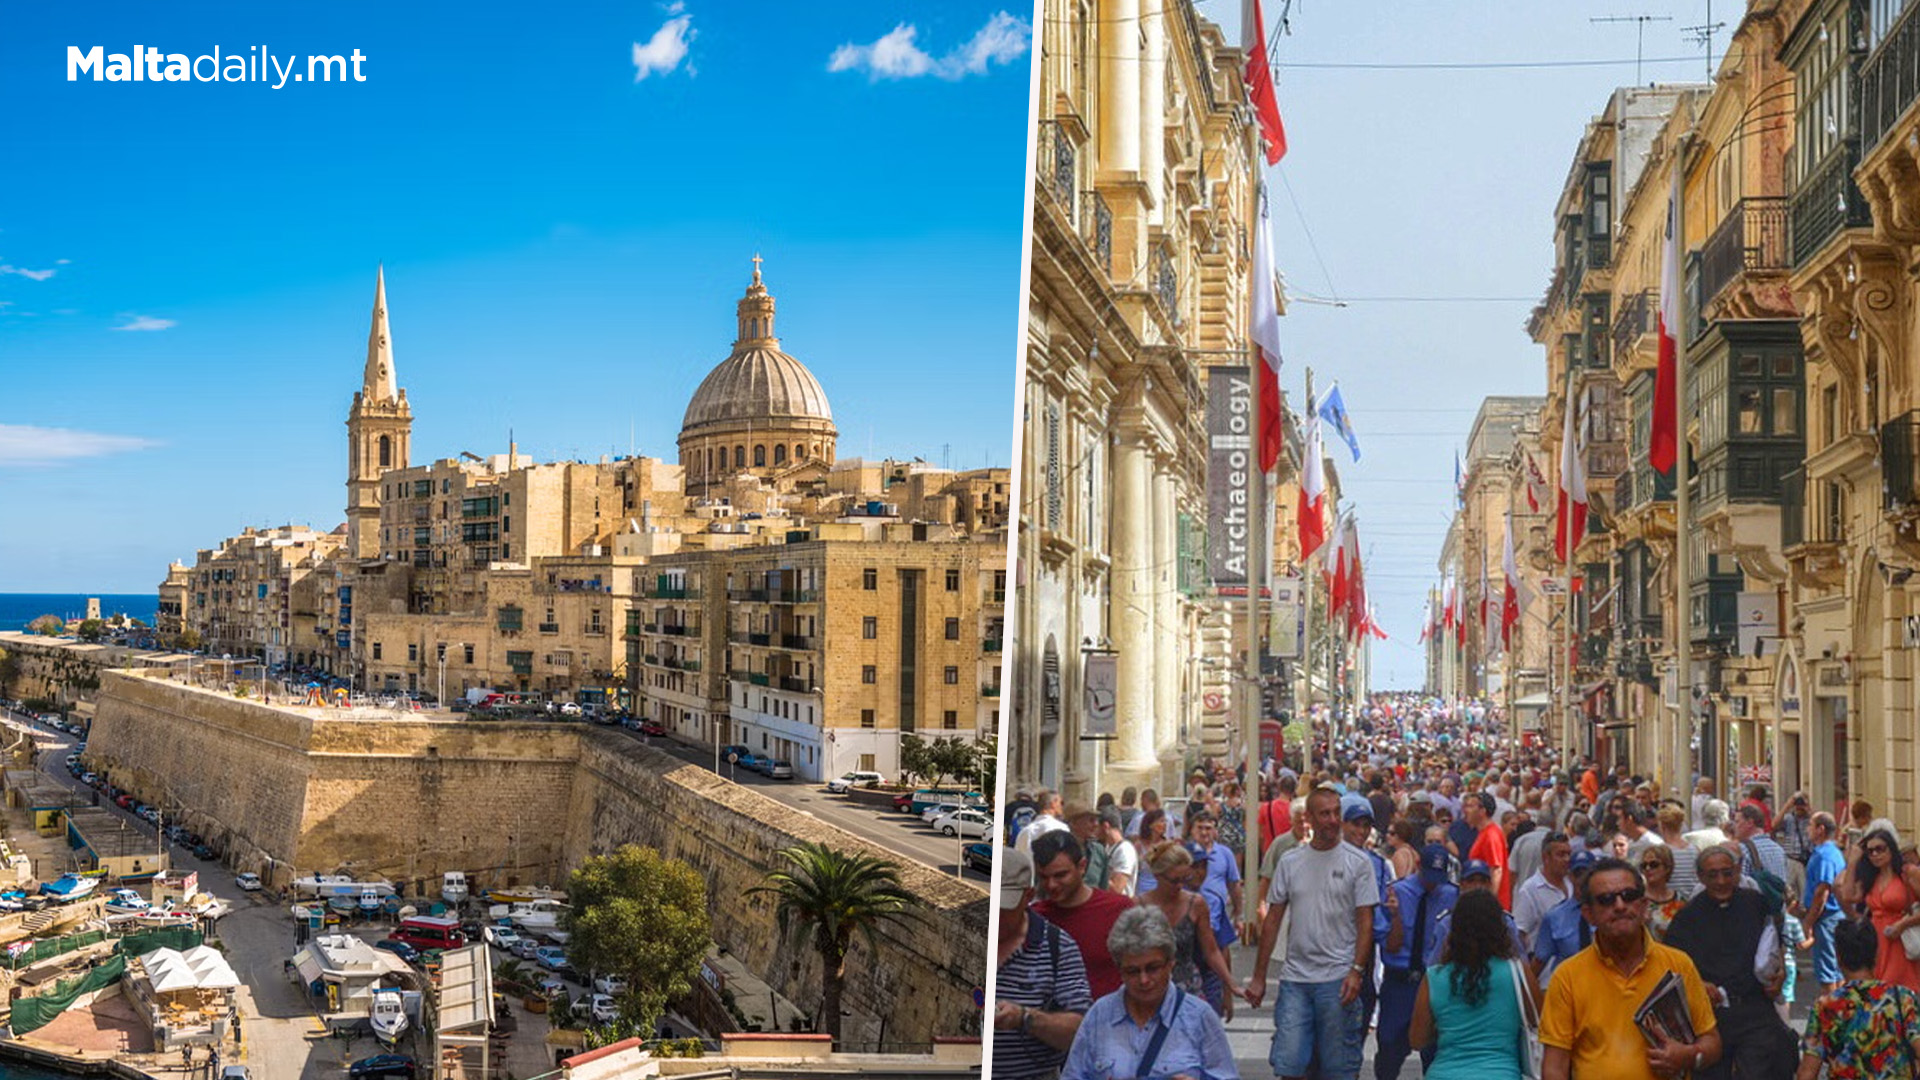 Malta Least Populated But With Largest Increase